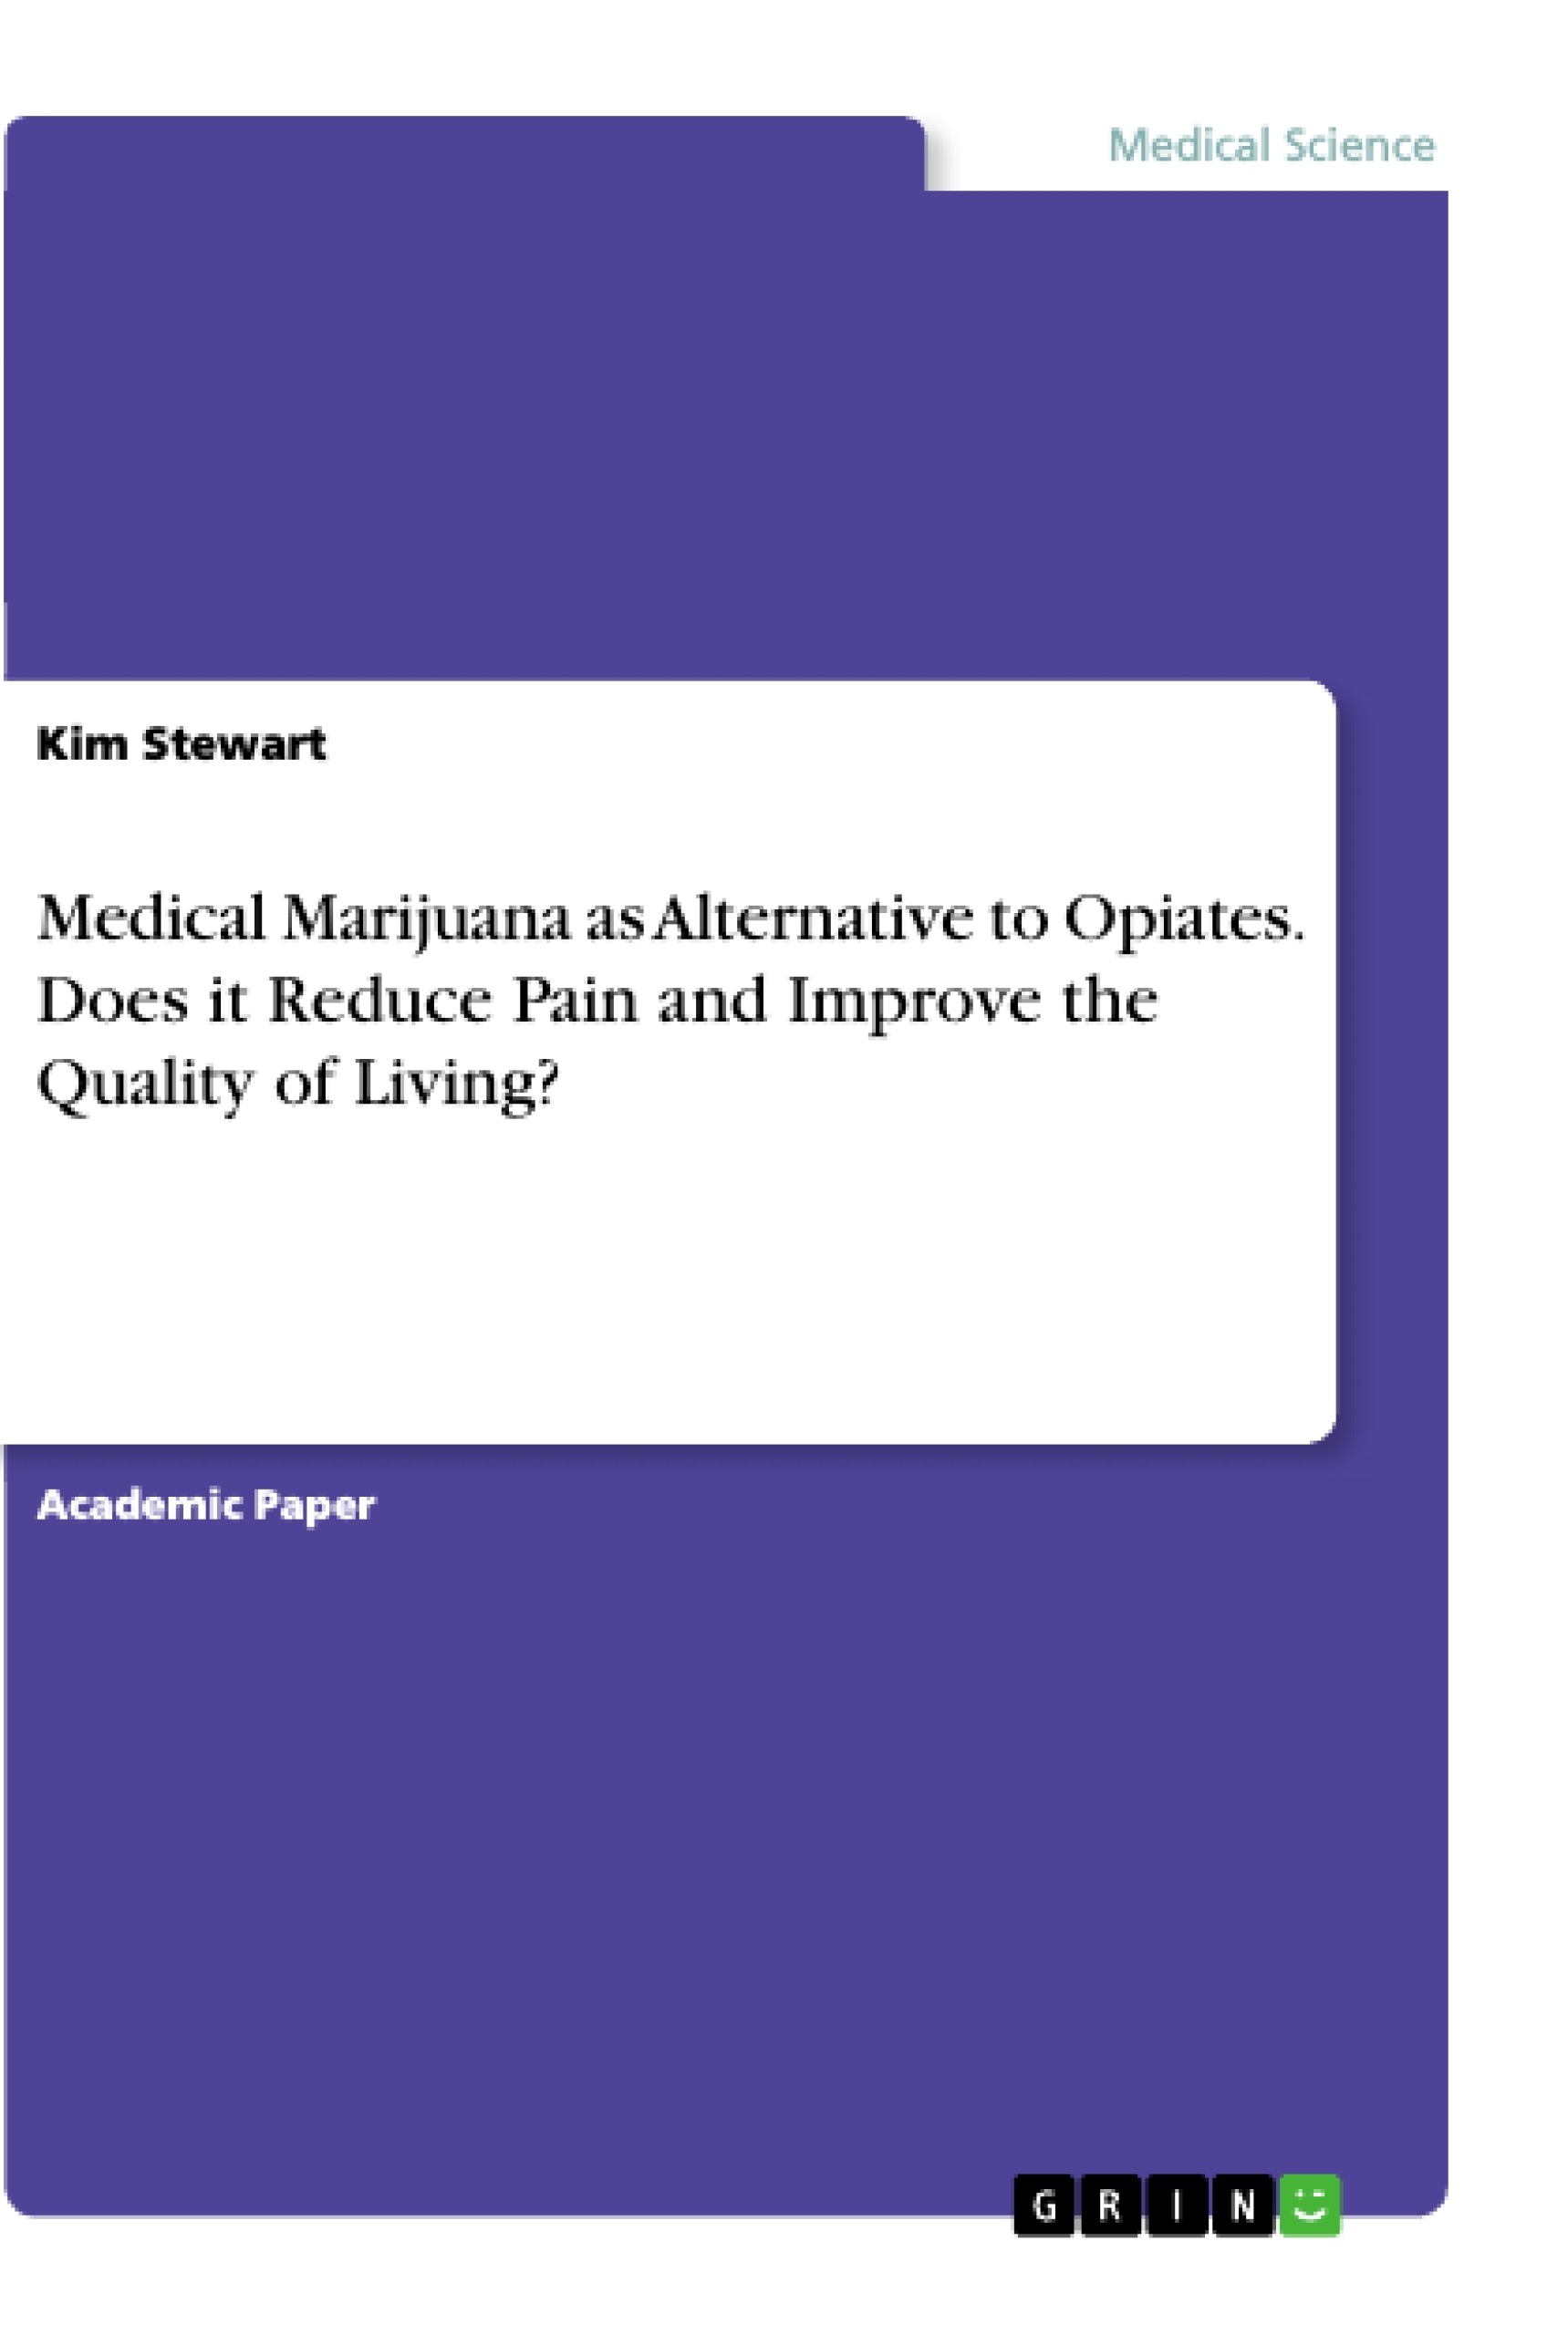 Titre: Medical Marijuana as Alternative to Opiates. Does it Reduce Pain and Improve the Quality of Living?